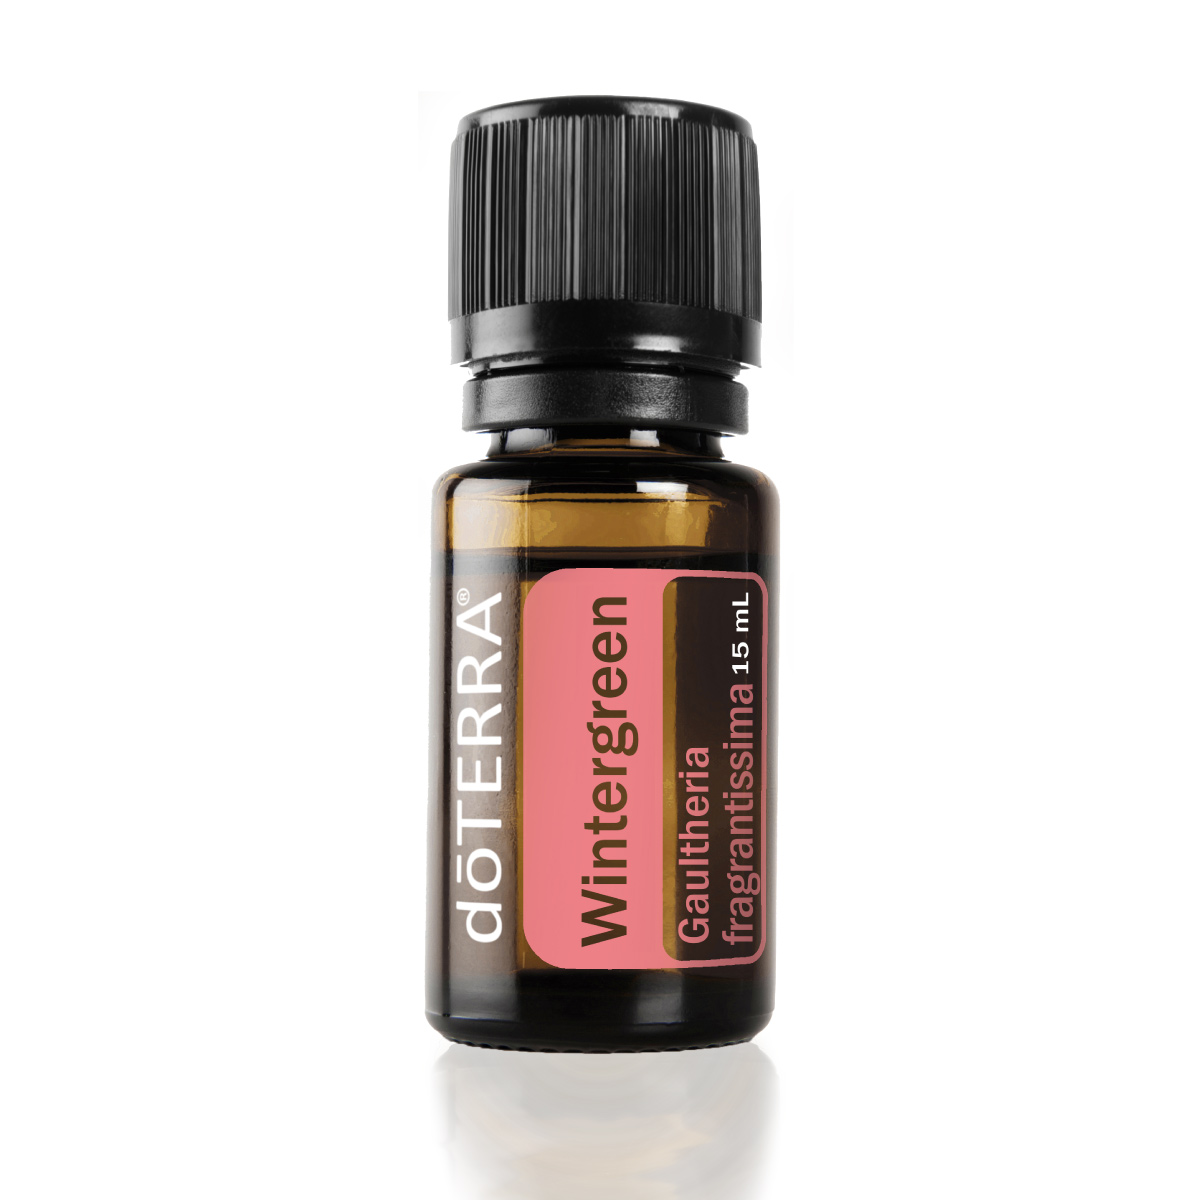 Bottle of doTERRA Wintergreen essential oil. How do you use Wintergreen oil? You can use Wintergreen oil for massage, to create an uplifting environment, or in a soothing bath. 